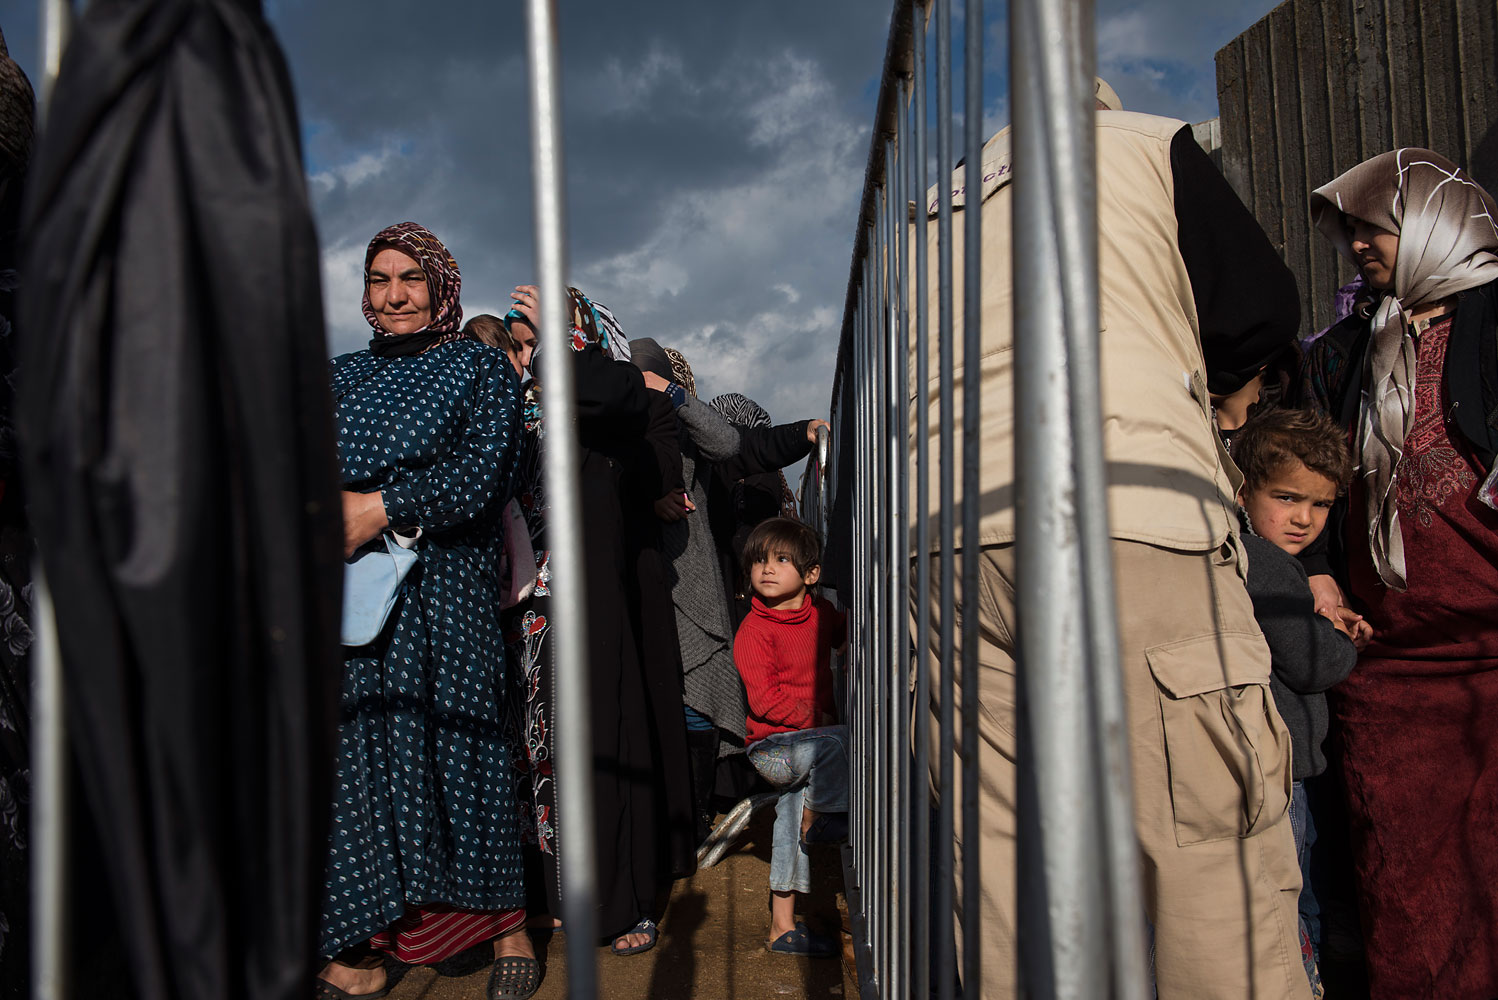 Syrian refugees line up to register or renew their registration at the UNHCR compound in Tripoli, in North Lebanon, March 11, 2014.